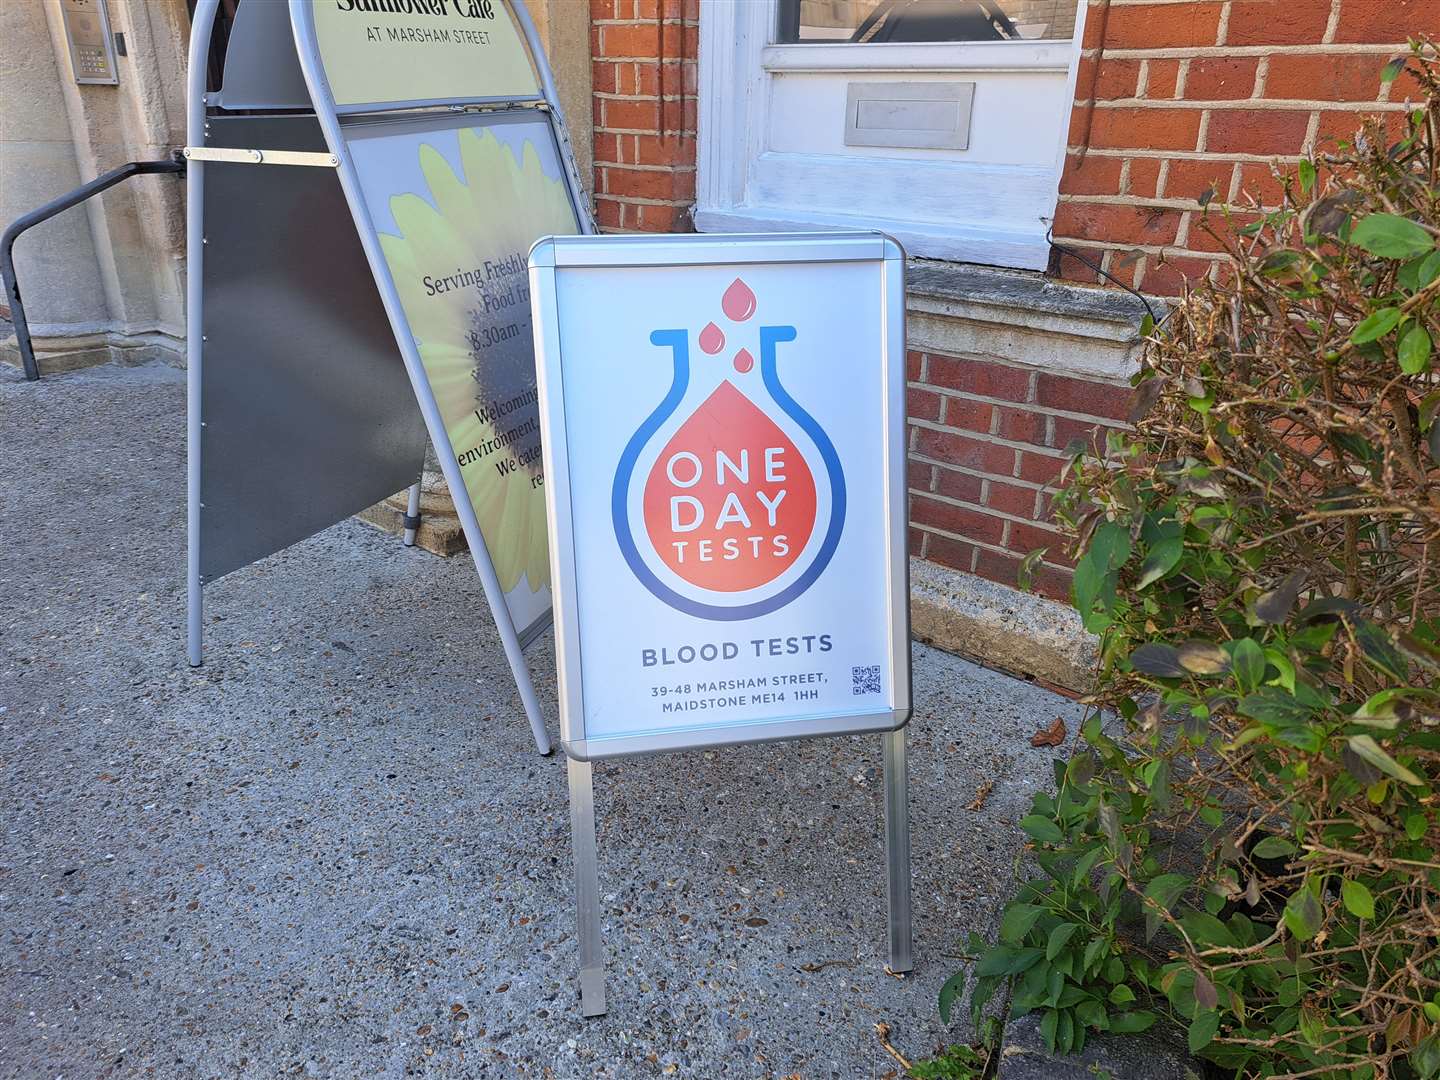 One Day Tests are at the Maidstone Community Support Centre in Marsham Street